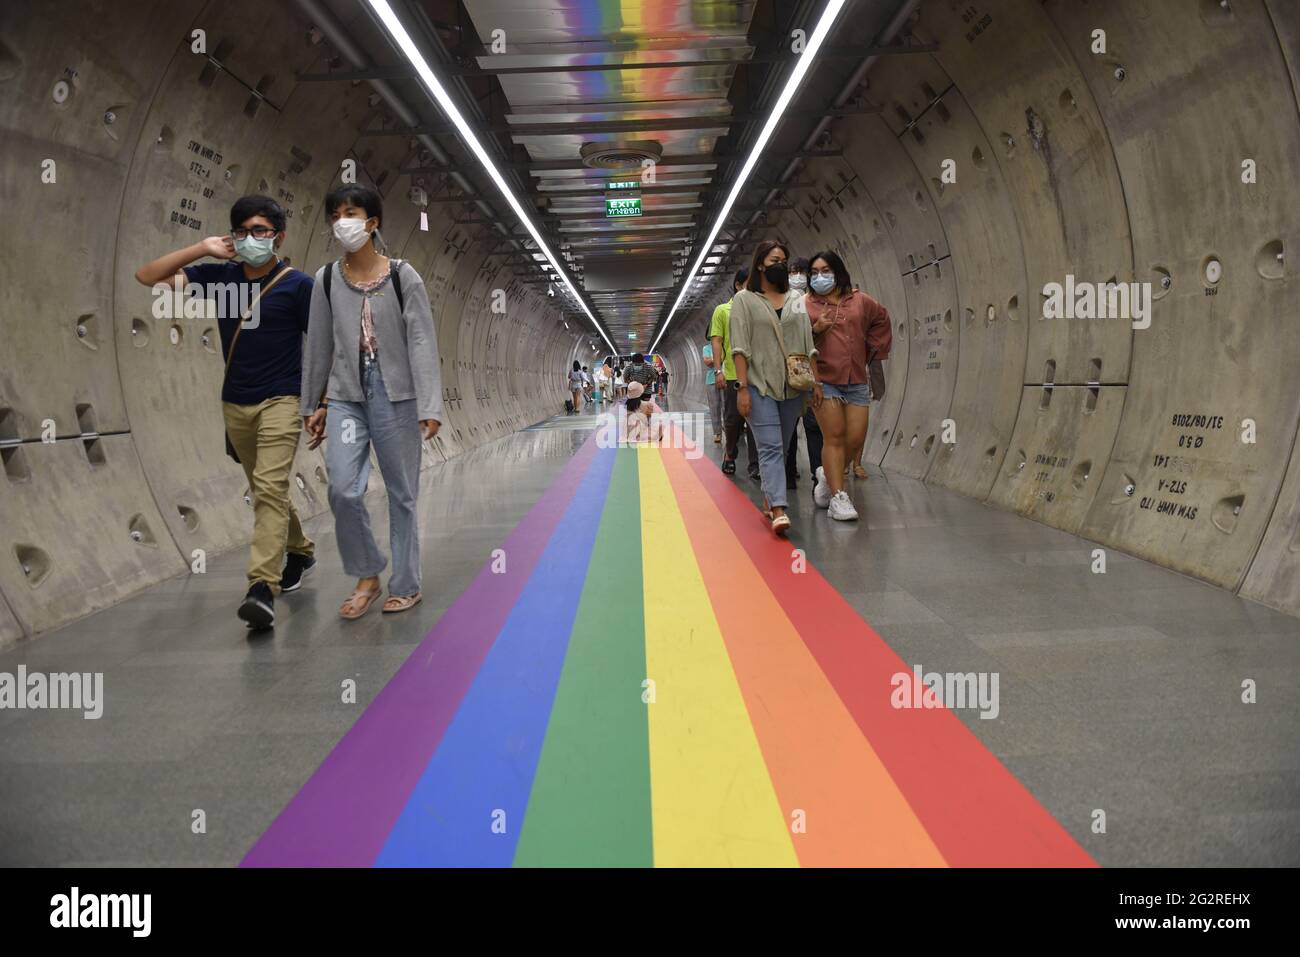 Bangkok, Thailand. 12th June, 2021. The famous shopping mall in the heart of Bangkok Samyan Mitrtown organizes the Samyan Mitr Proud 100% Love campaign by renovating the tunnel corridors. and pedestrian with decorations with colors To celebrate LGBTQ's Pride Month, or Pride Month, it caught the attention of passersby who had to take a photo. (Photo by Teera Noisakran/Pacific Press) Credit: Pacific Press Media Production Corp./Alamy Live News Stock Photo